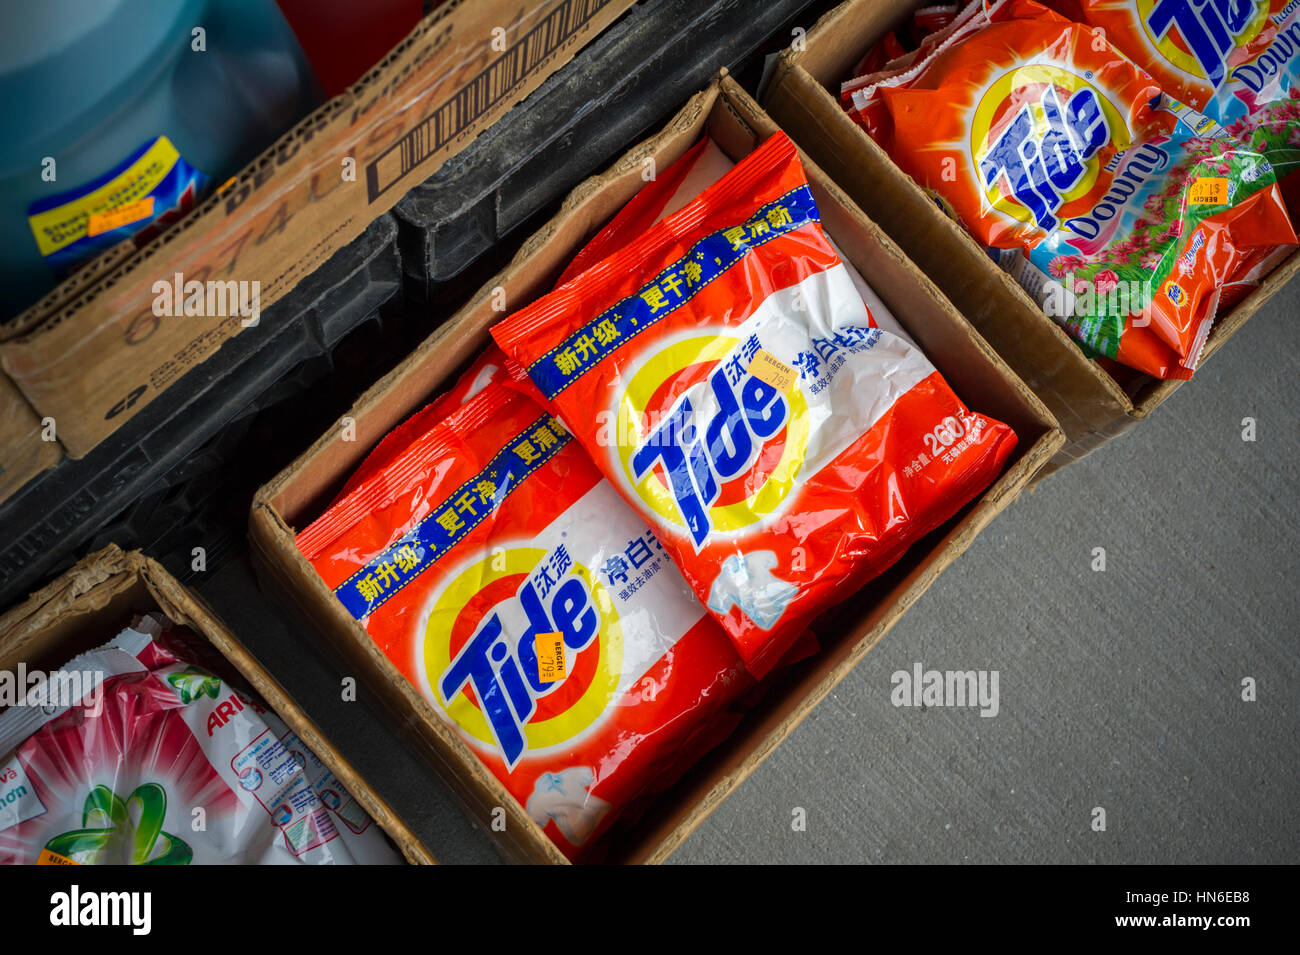 Packages of Procter & Gamble's Tide detergent in English and Chinese in the  Melrose neighborhood of the Bronx in New York Sunday, February 5, 2017. Tide  is the largest selling detergent in